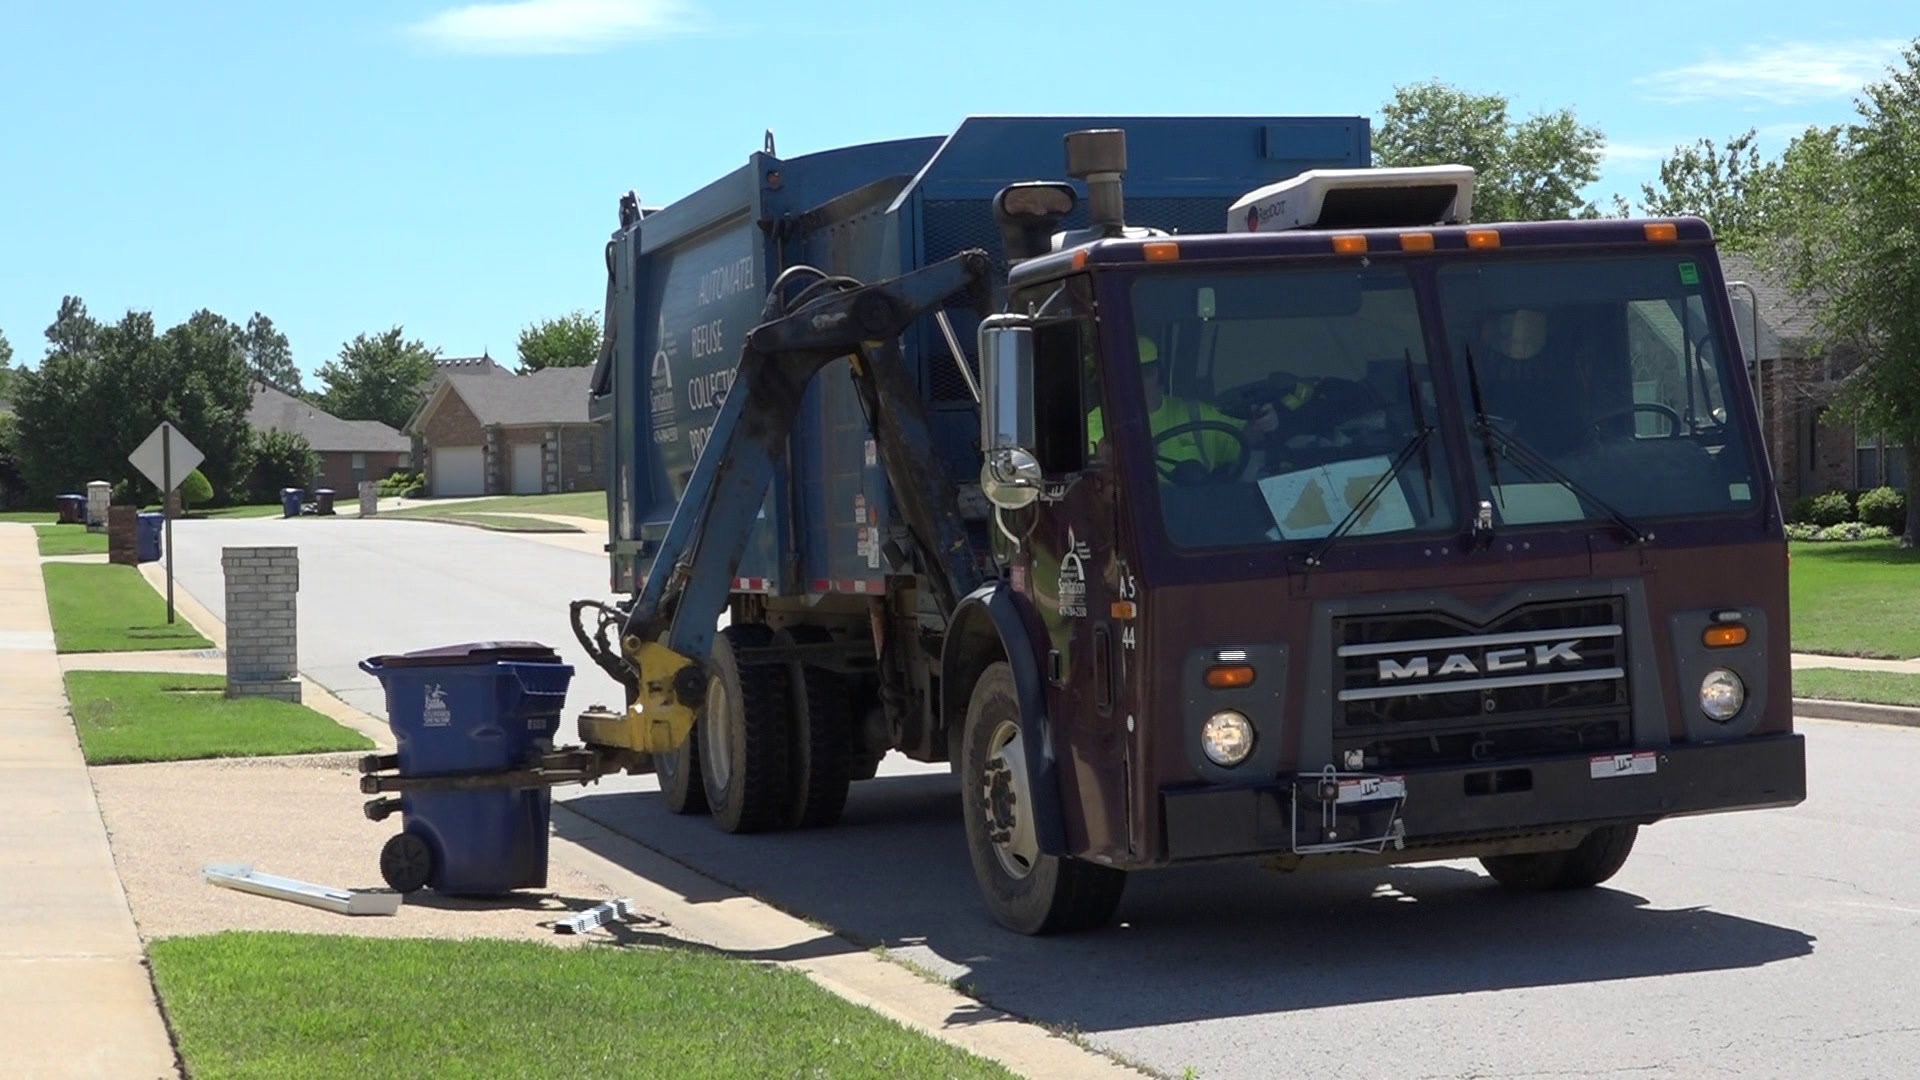 The city took recyclable materials to the landfill from October 2014 to June 2017, but residents were not notified that their recyclables were not being recycled.